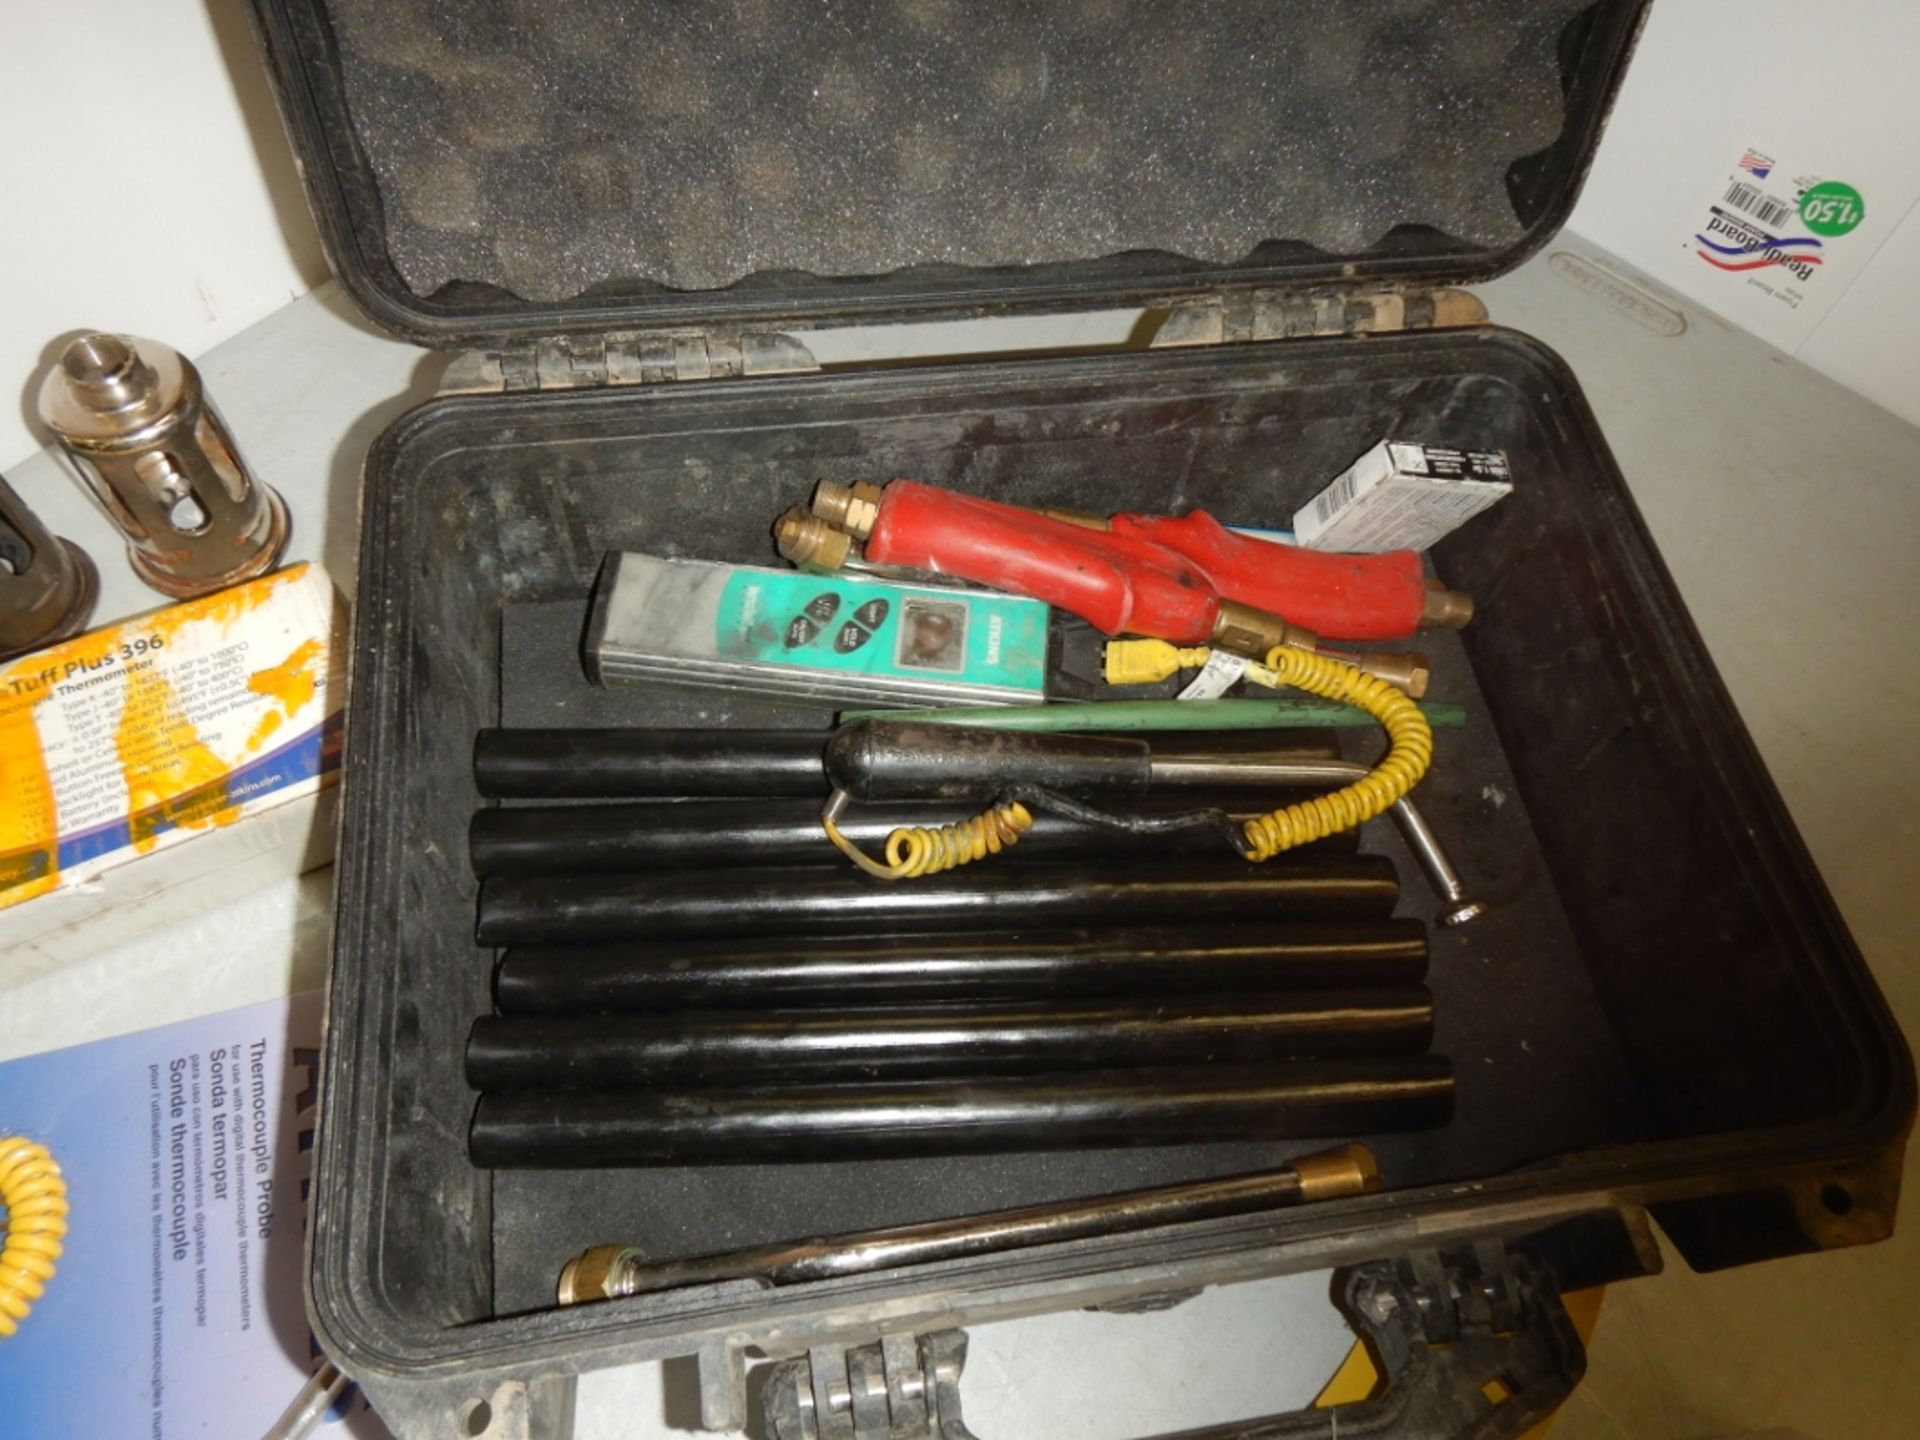 THERMOCOUPLE PROBE, PROPANE TORCHES, THERMOCOUPLE DIGITAL READER - Image 2 of 3